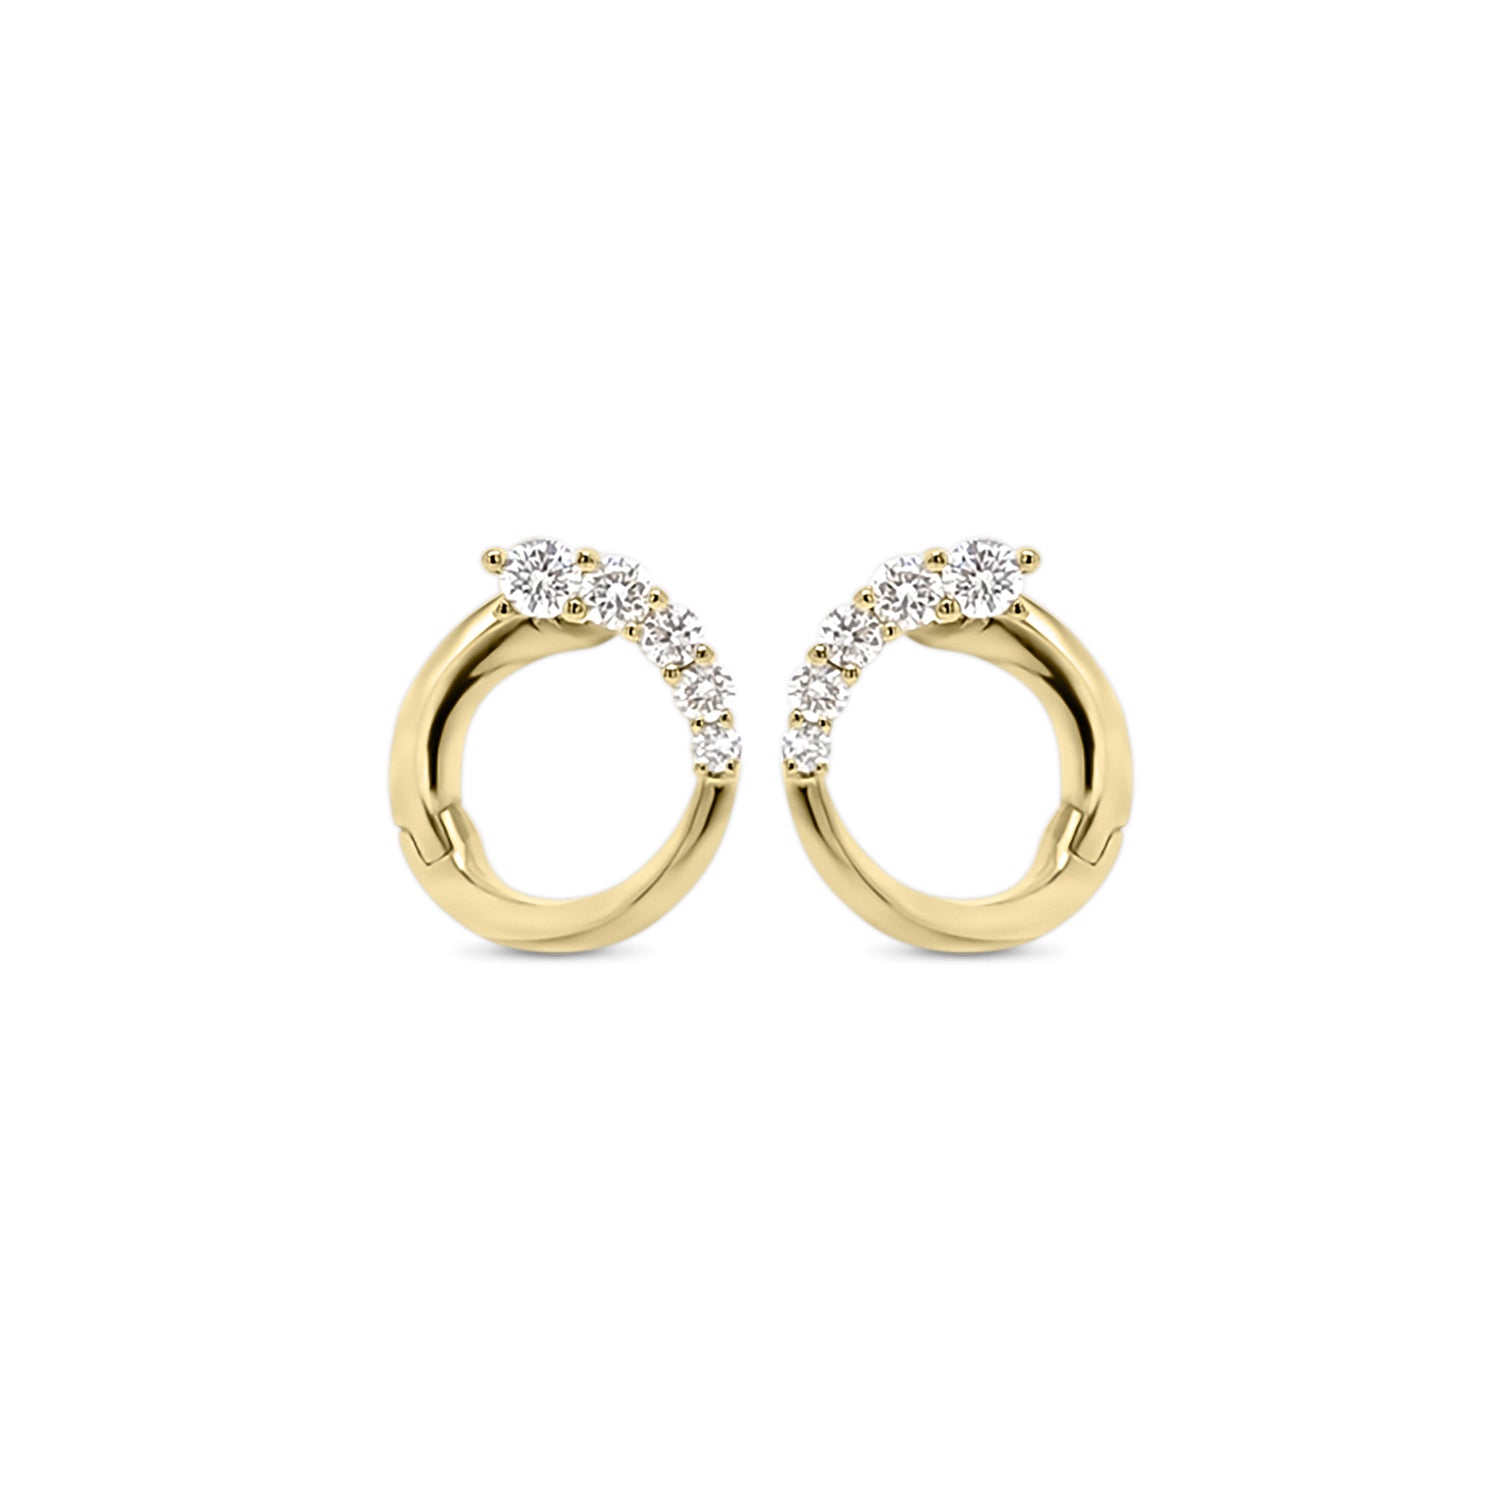 Diamond Small Front-Facing Hoop Earrings - 14K gold weighing 1.94 grams  - 10 round diamonds totaling 0.26 carats